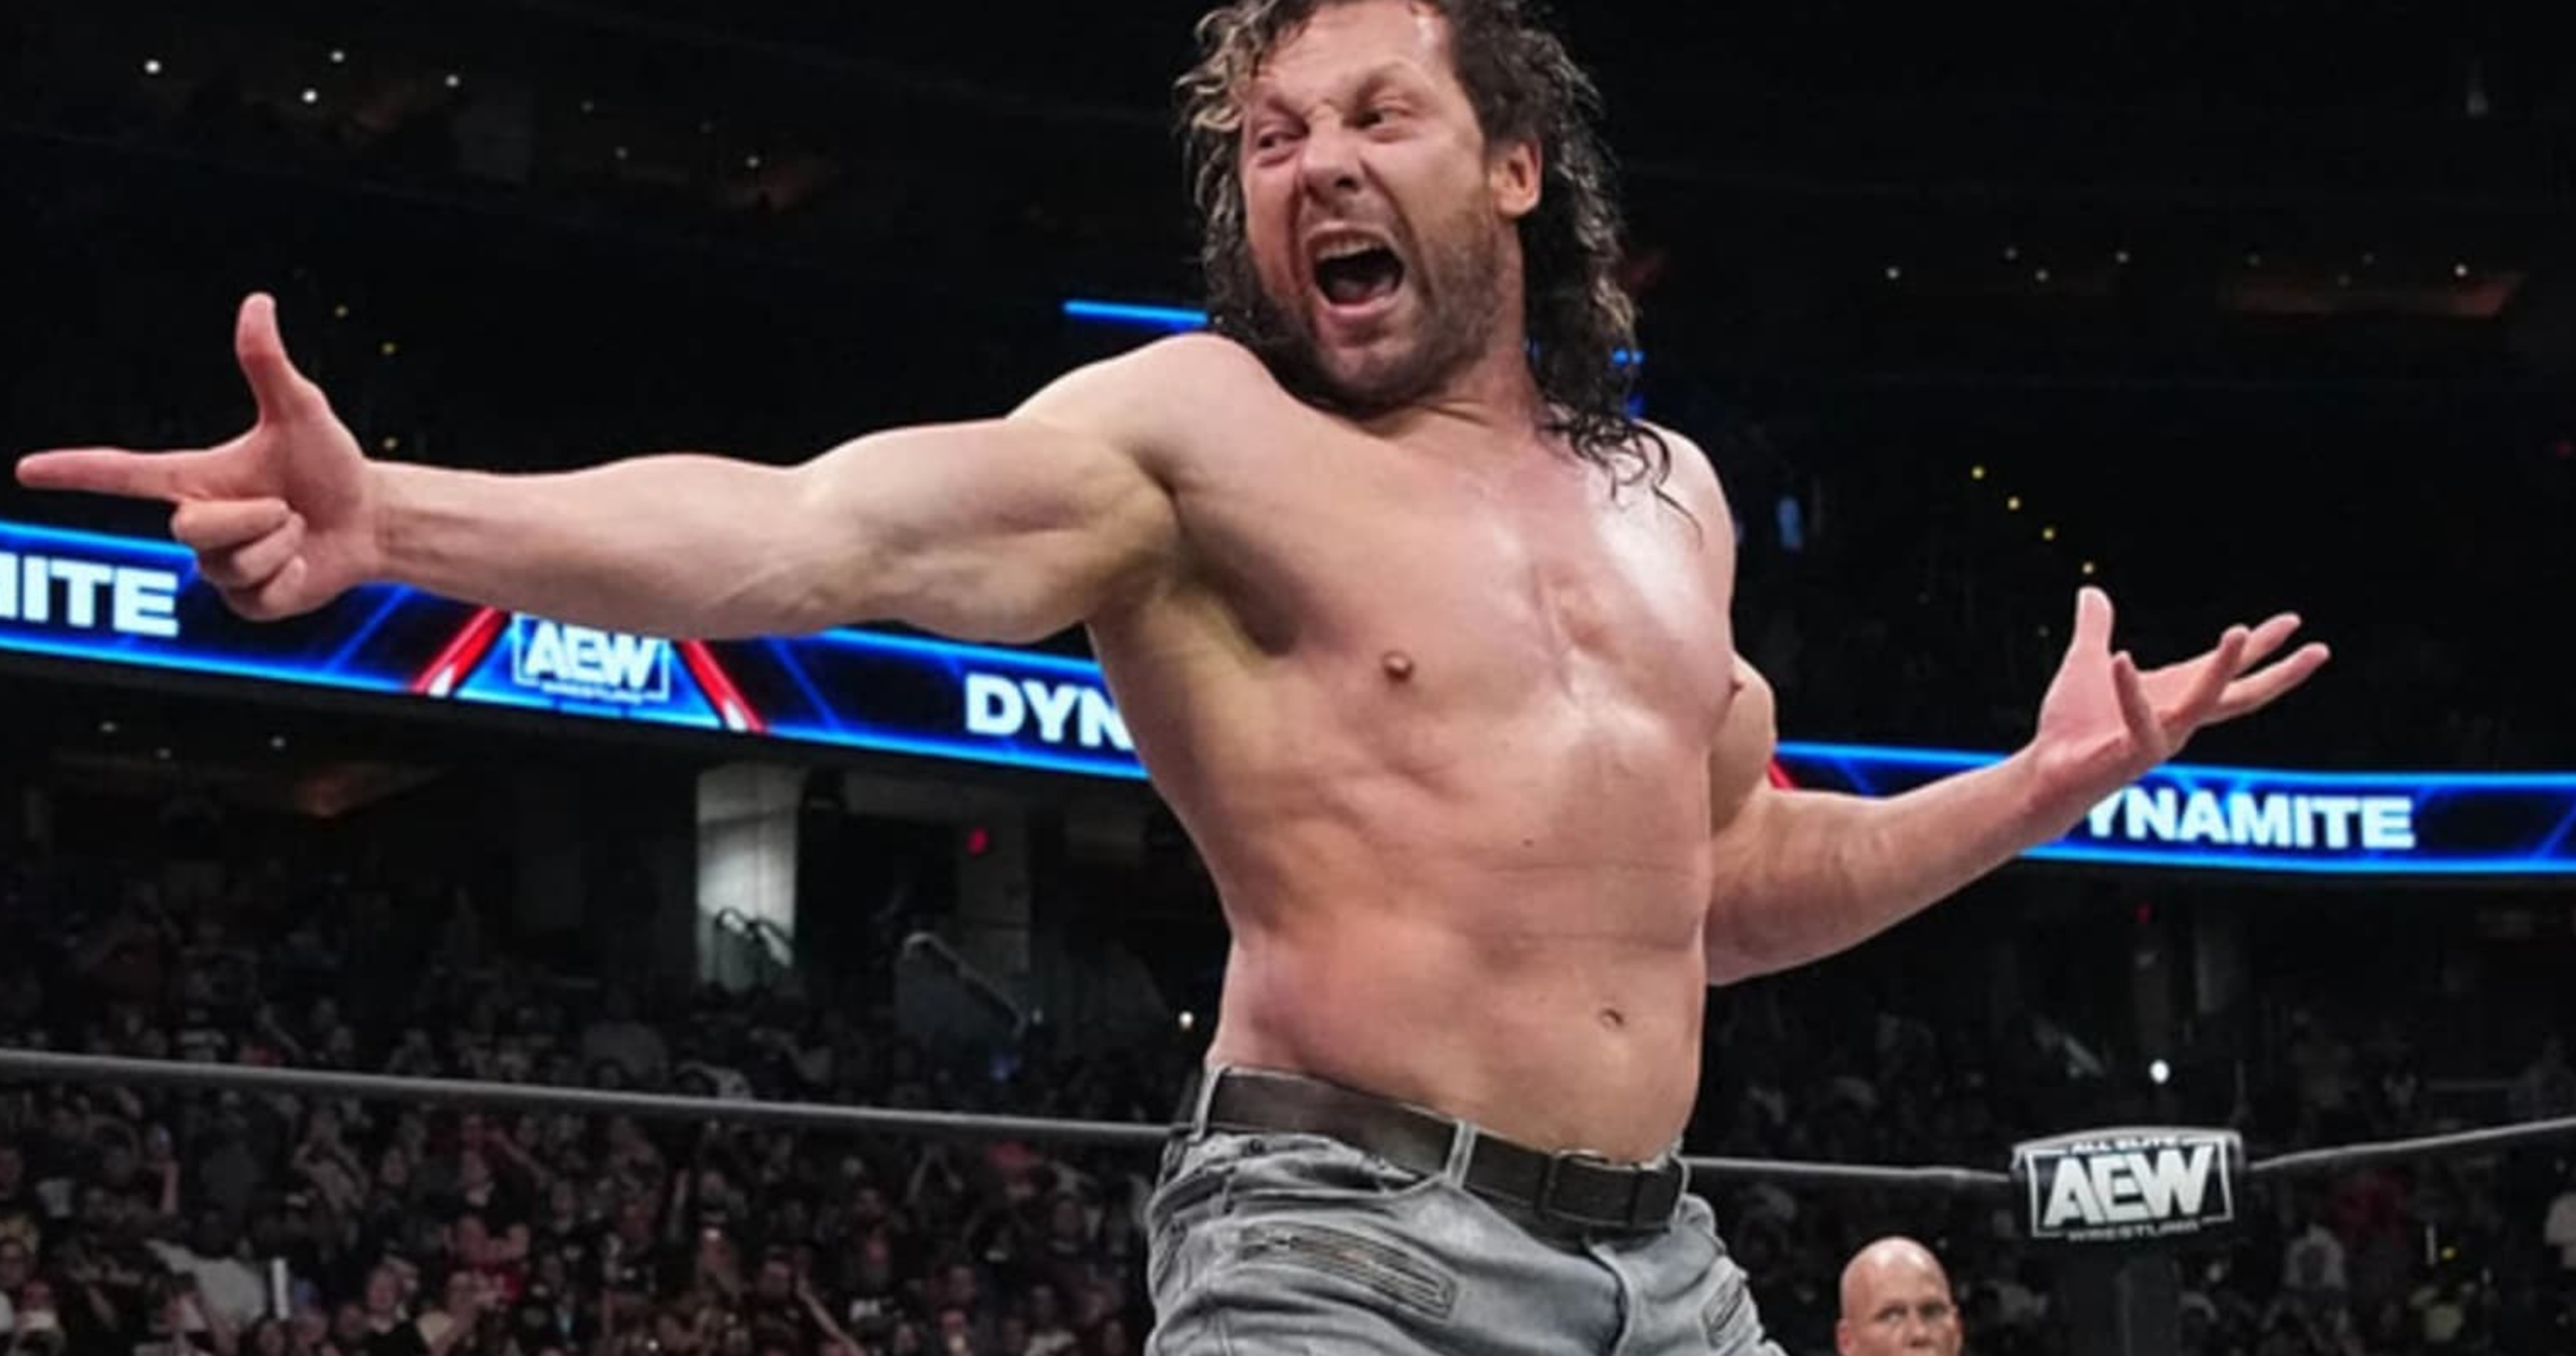 Kenny Omega: The Elite's Reunion Shows That Bitter Rivals Can Hash It Out  For The Greater Good